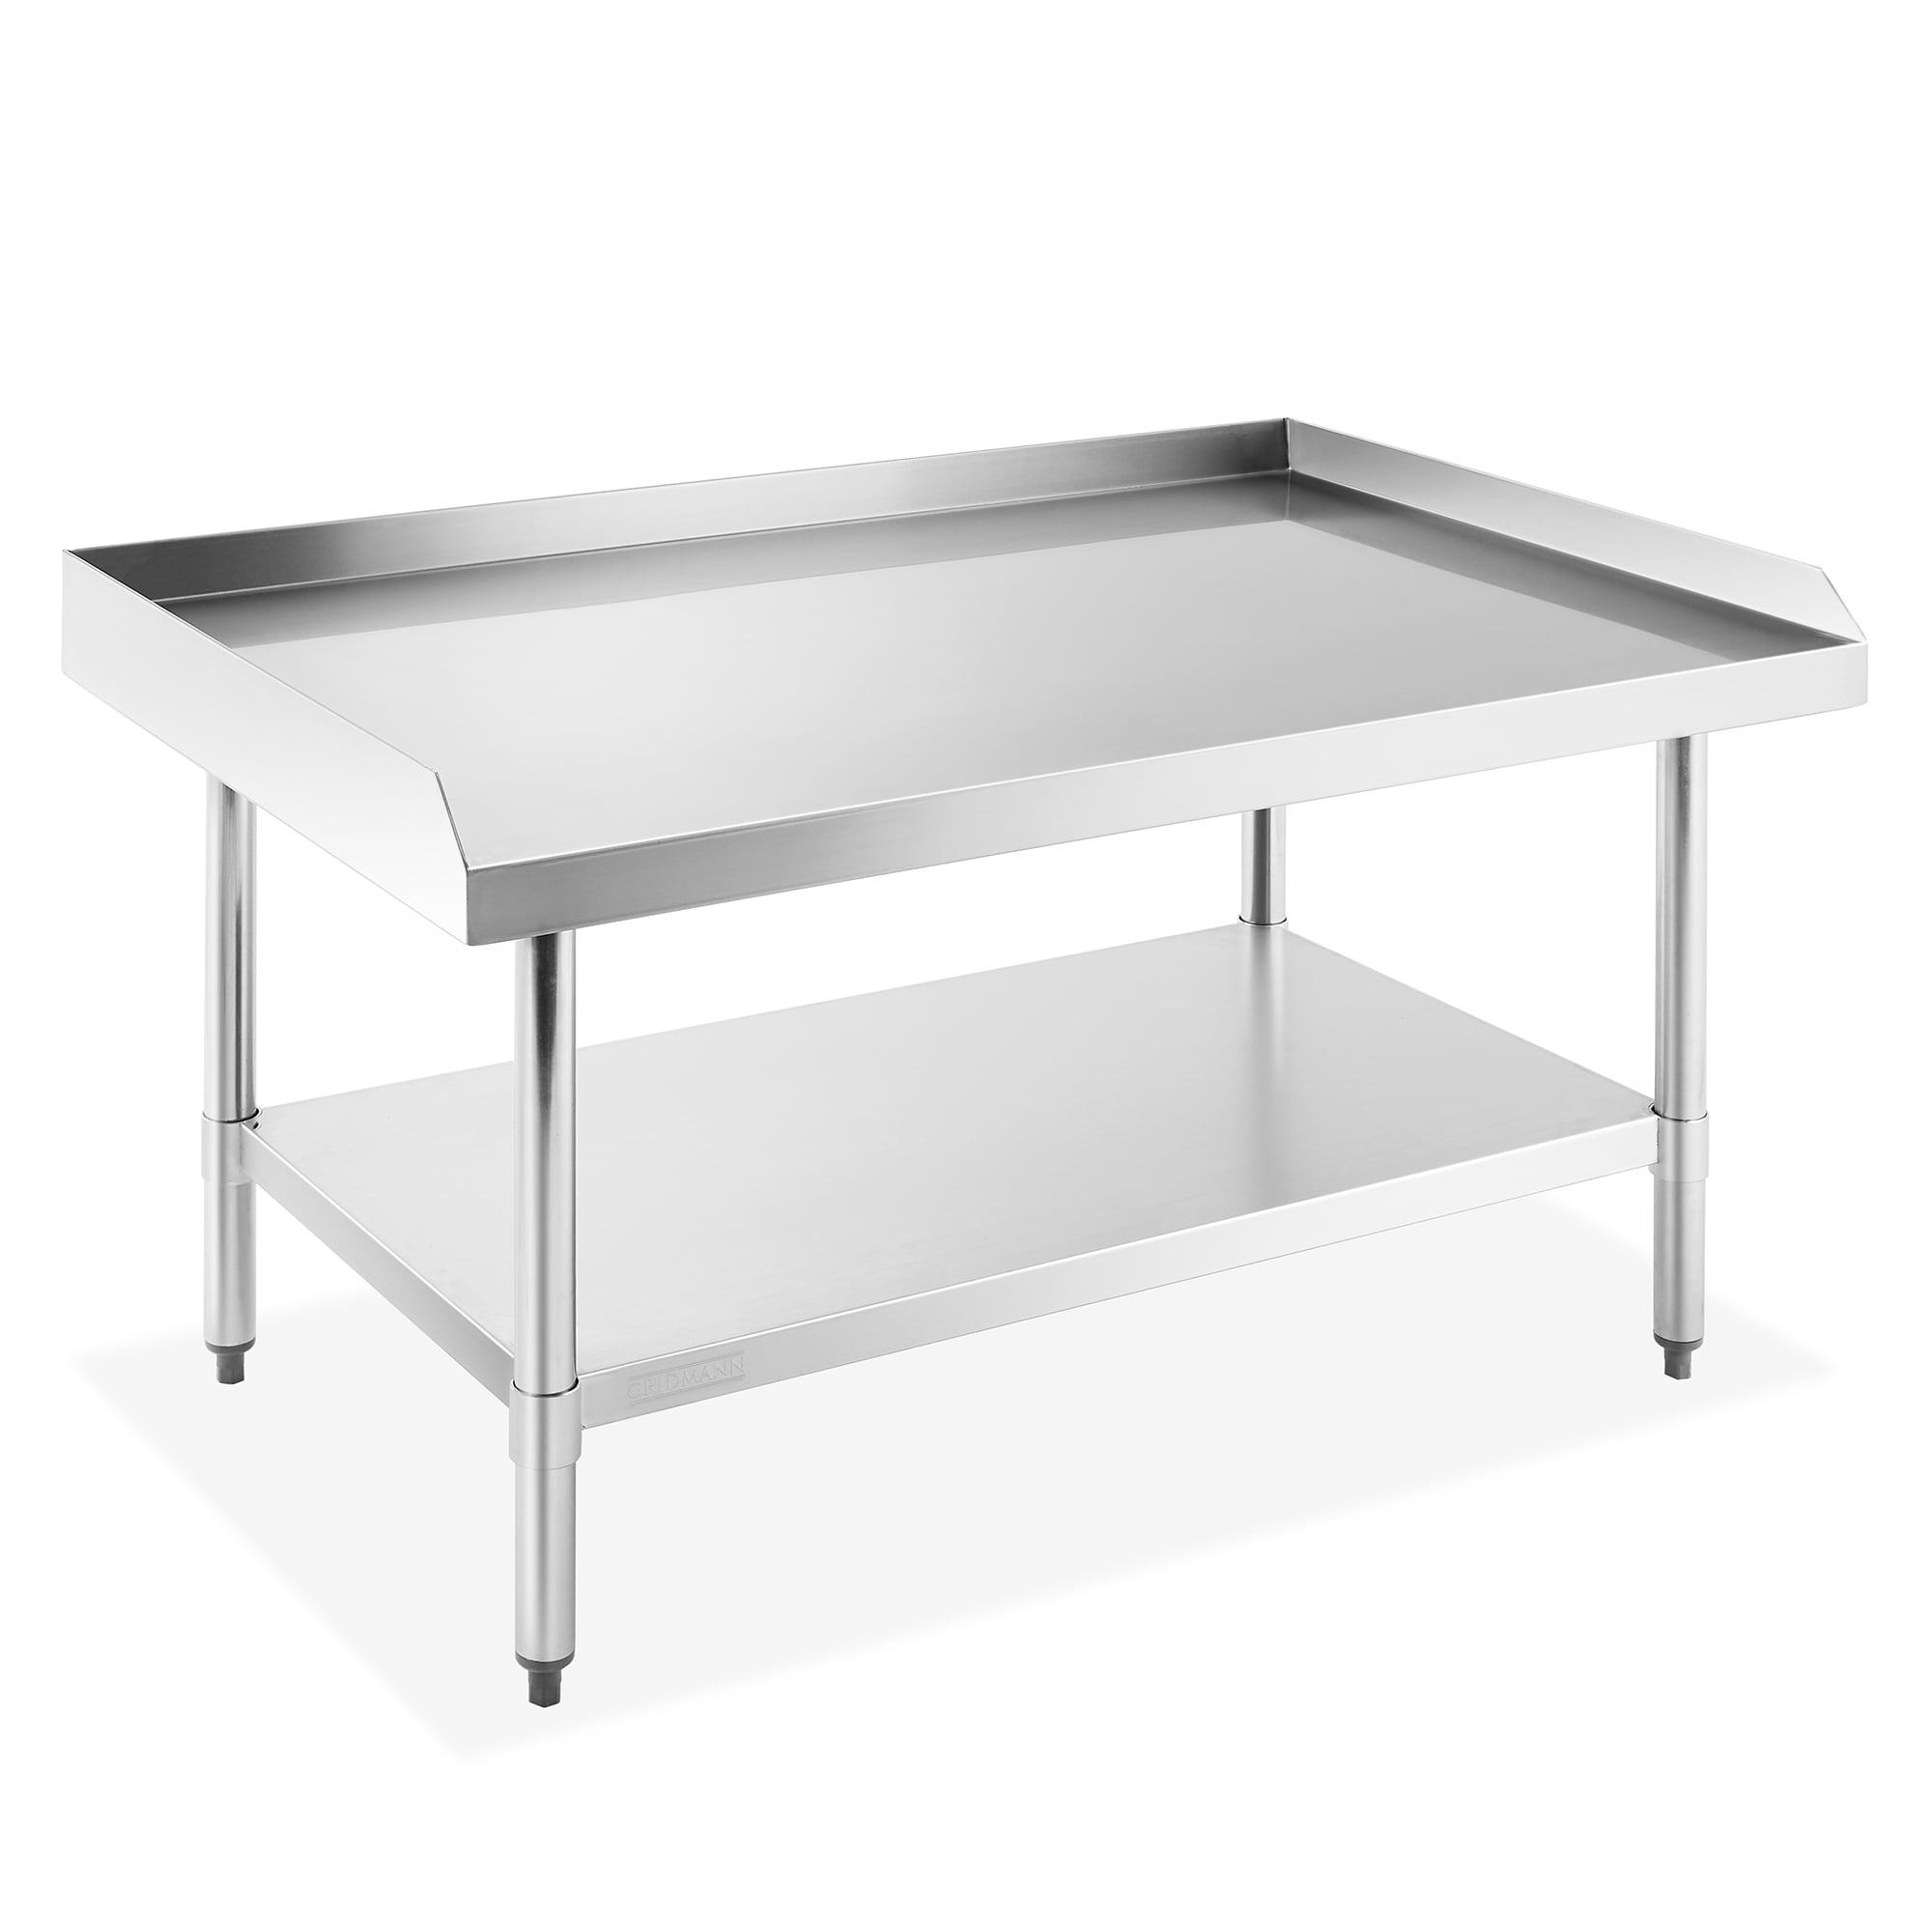 24 Width x 60 Length Commercial Grade AmGood Stainless Steel Equipment Stand with Undershelf Heavy Duty NSF Certified 